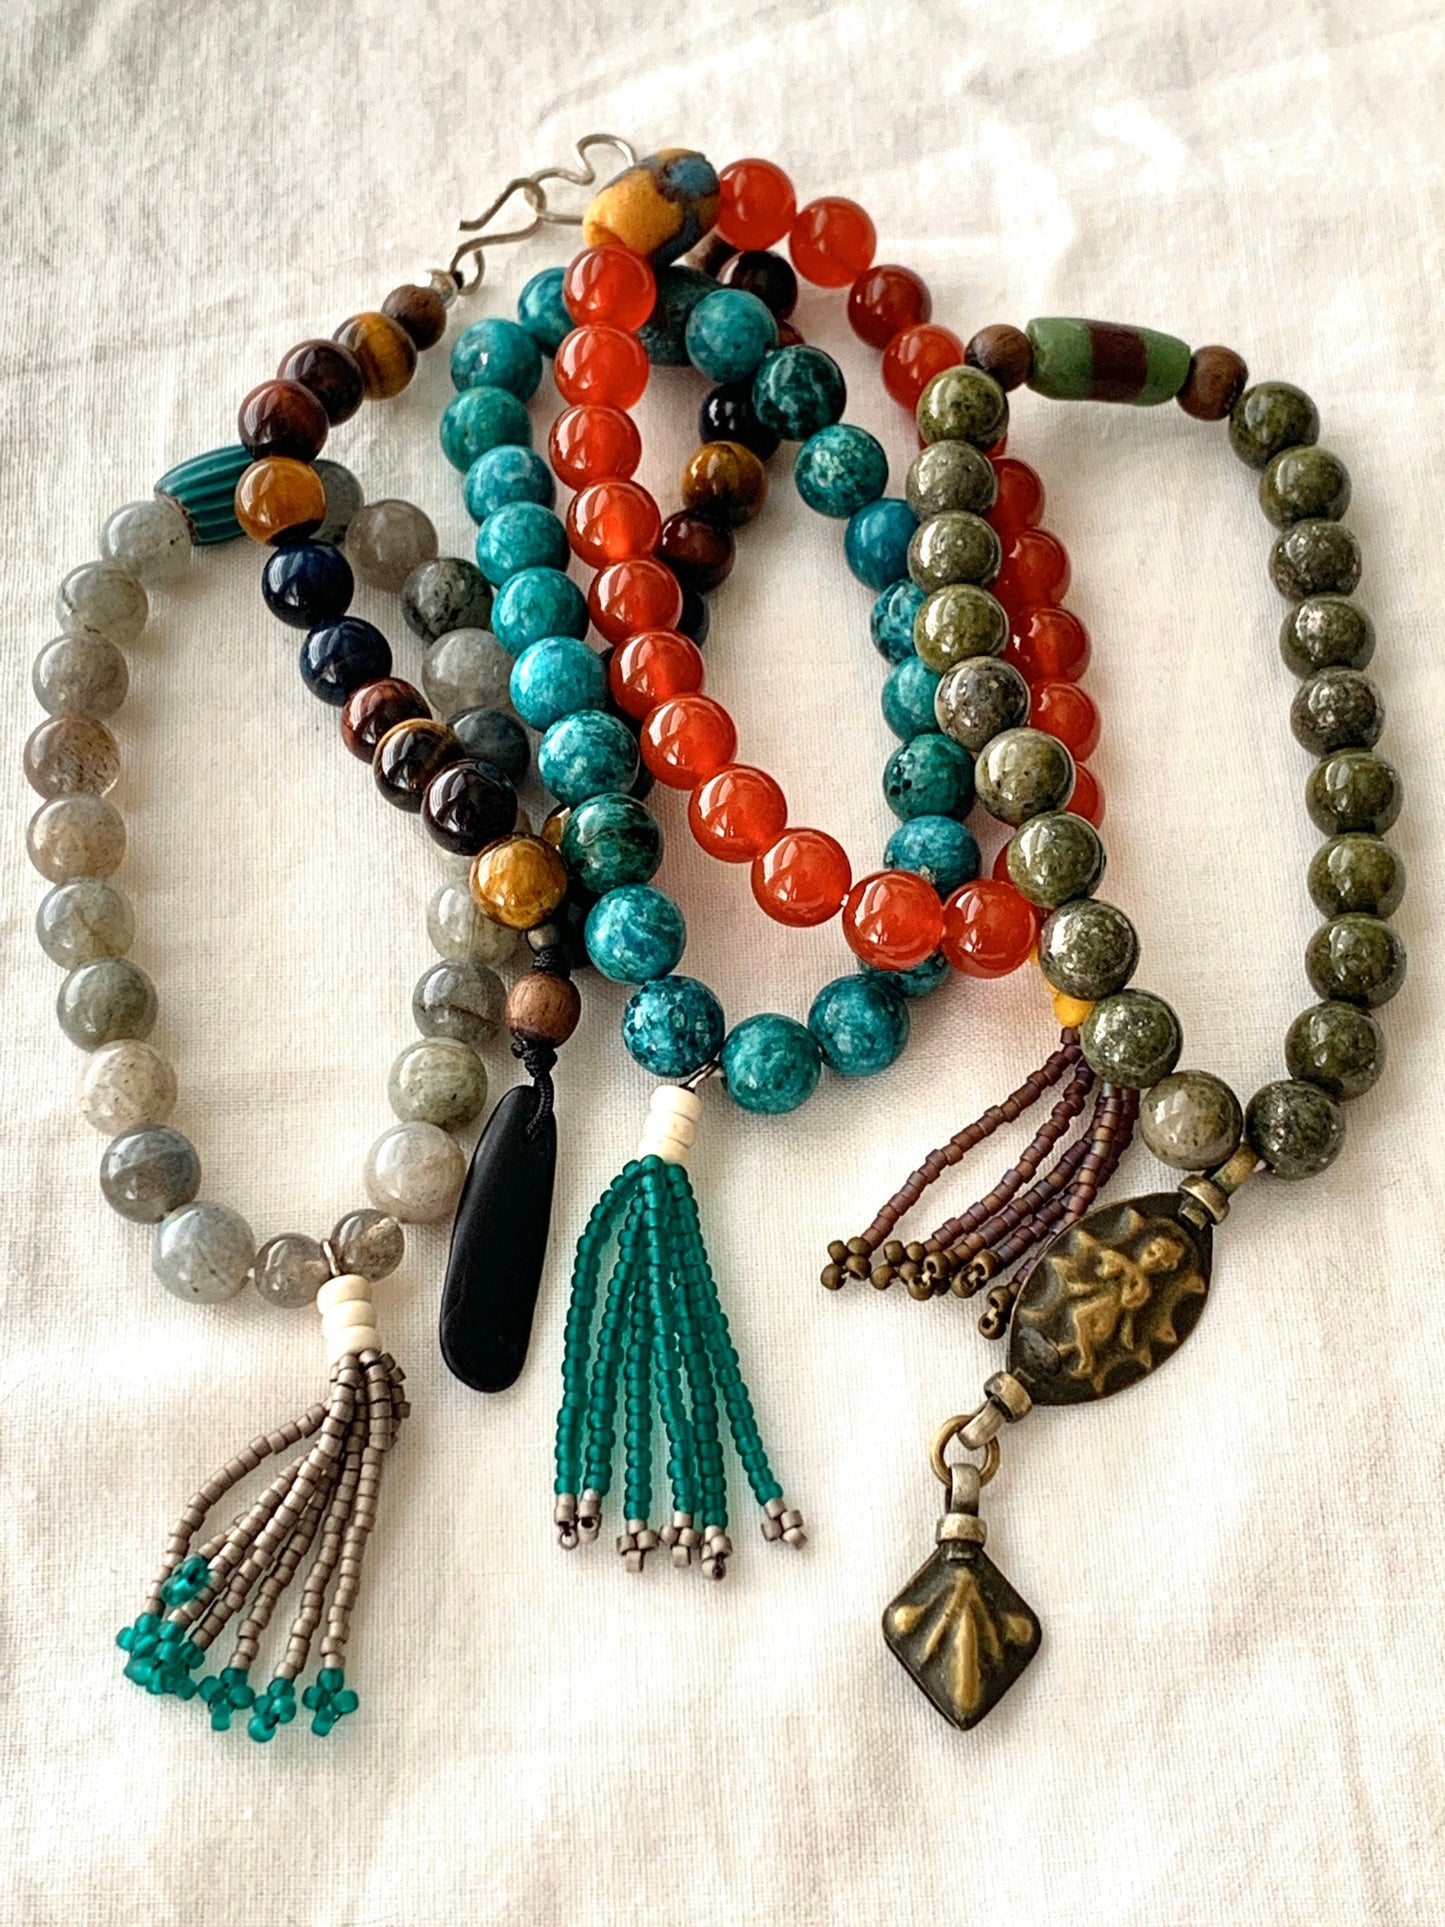 Chrysocolla bead bracelet with beaded tassel and African trade bead.